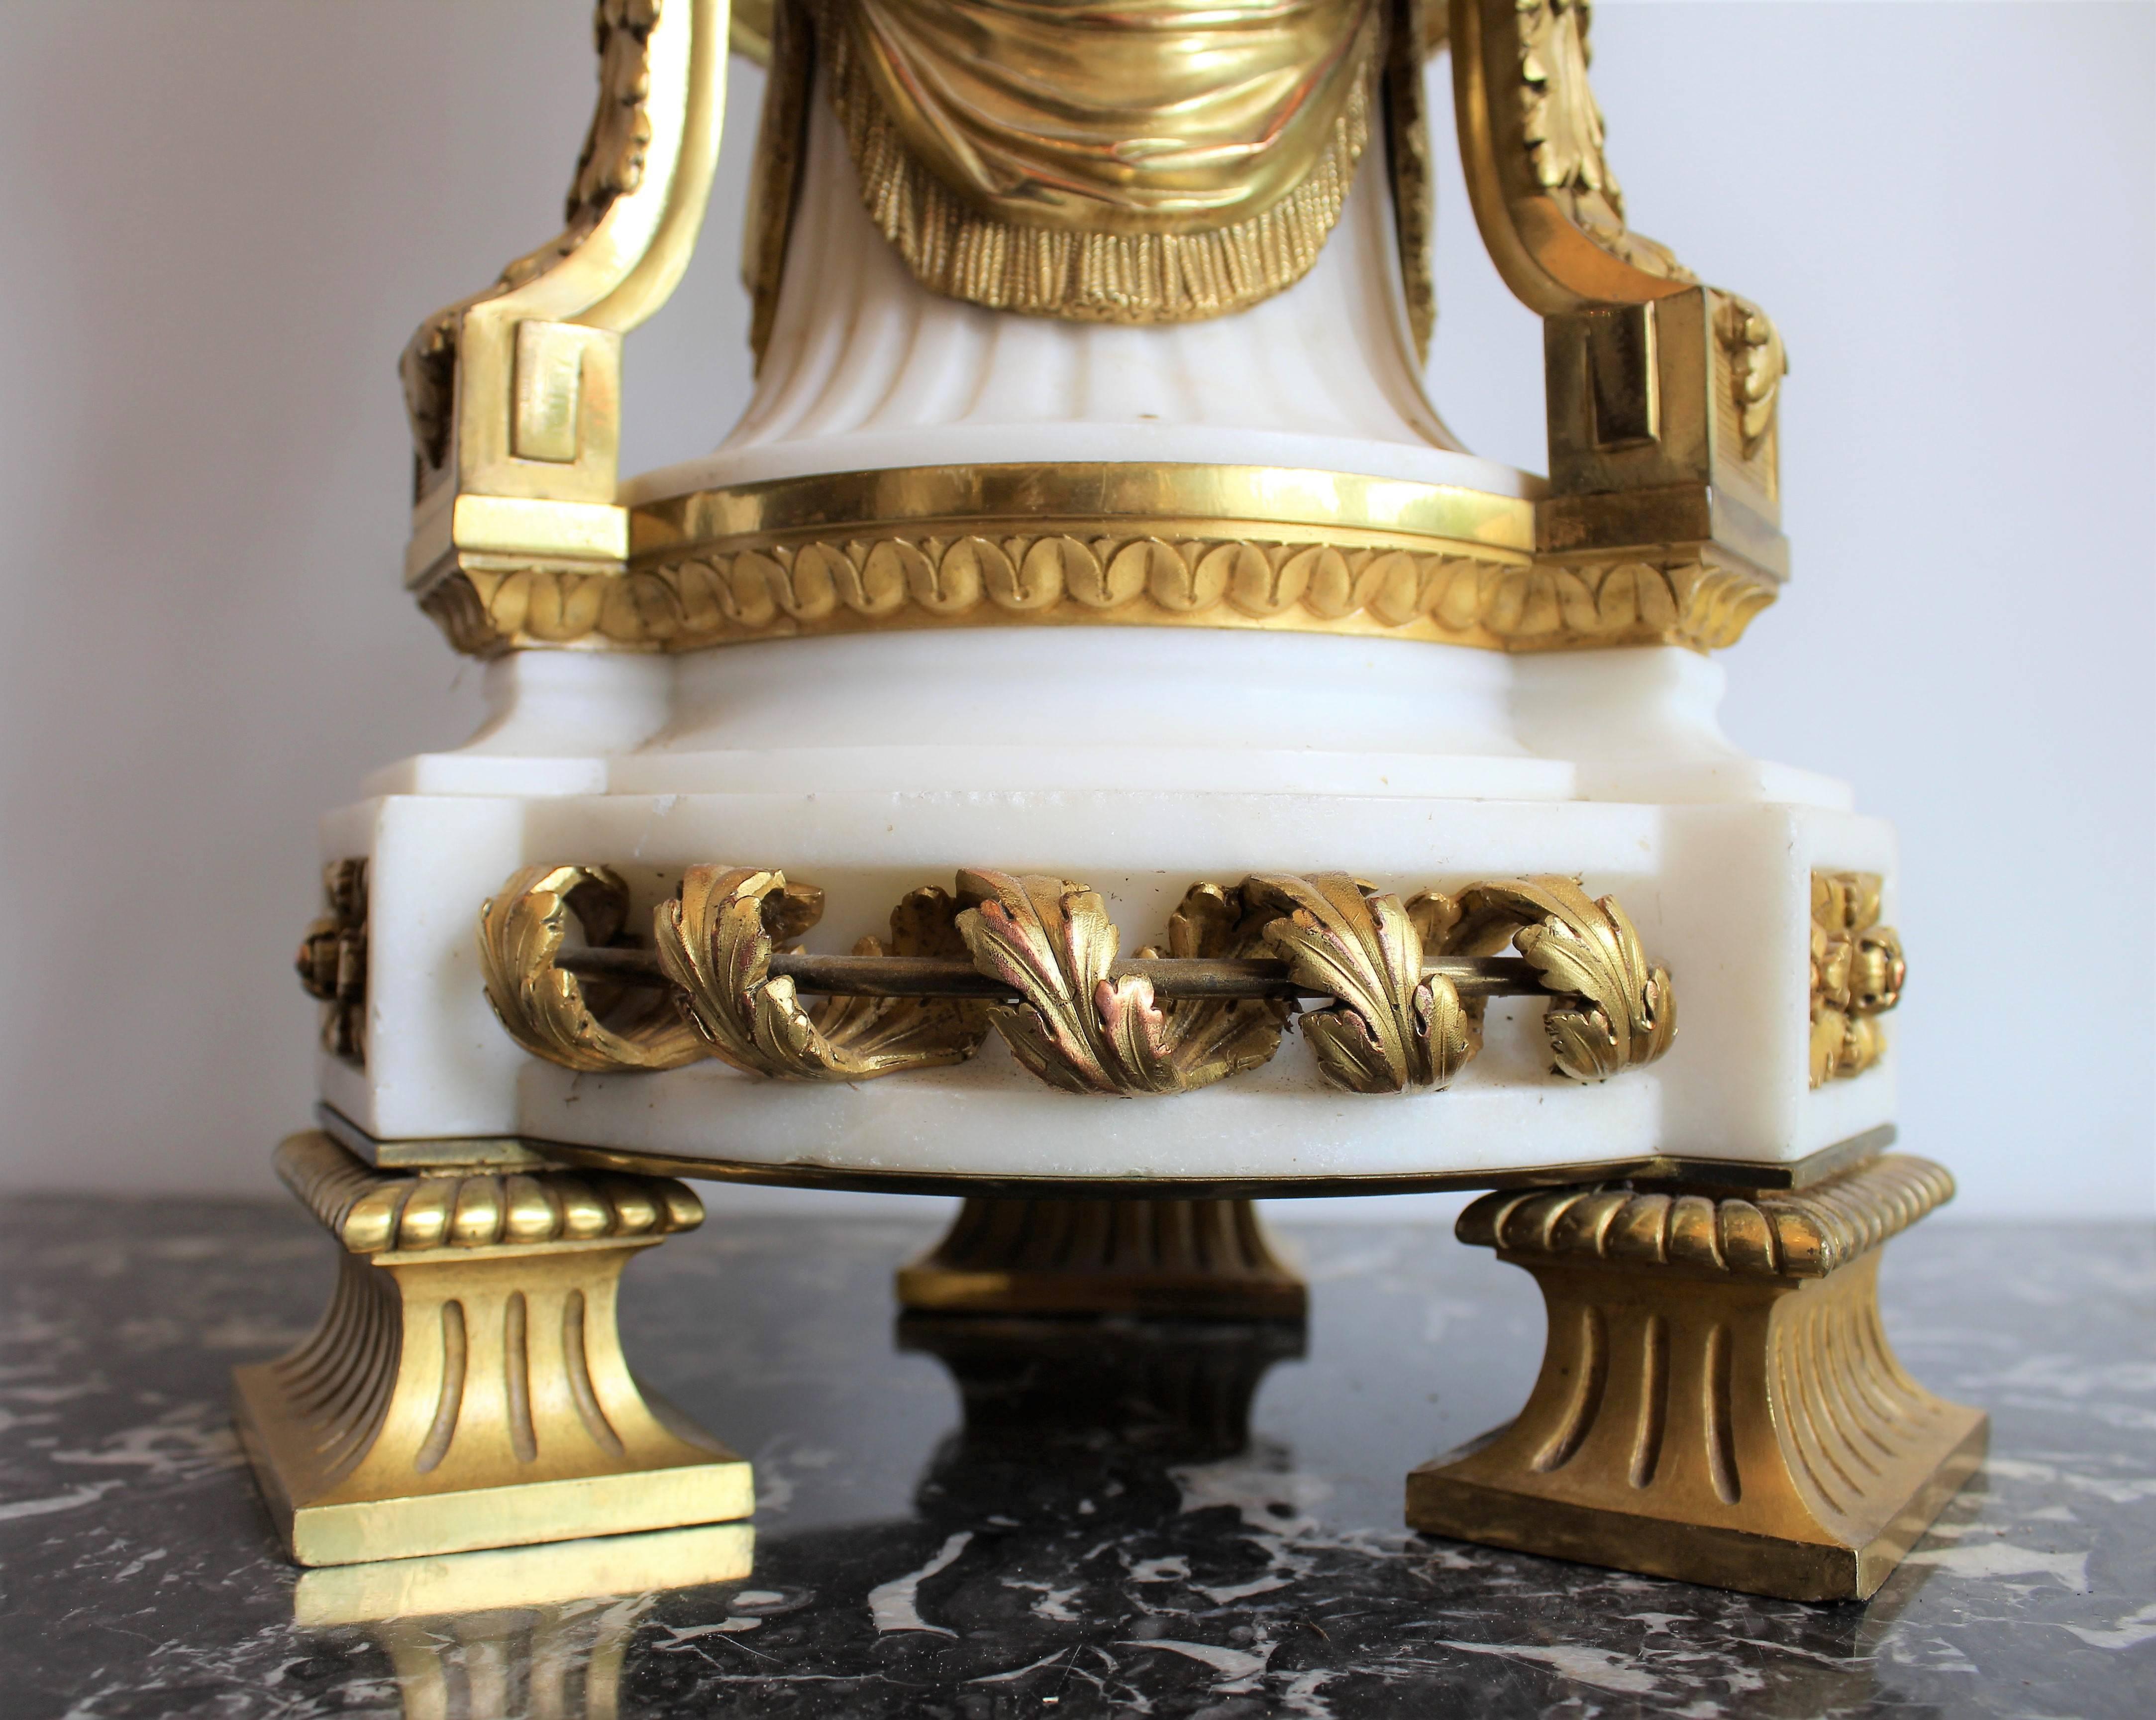 19th Century French Louis XVI Style Gilt Bronze and Marble Centerpiece with Figural Putti